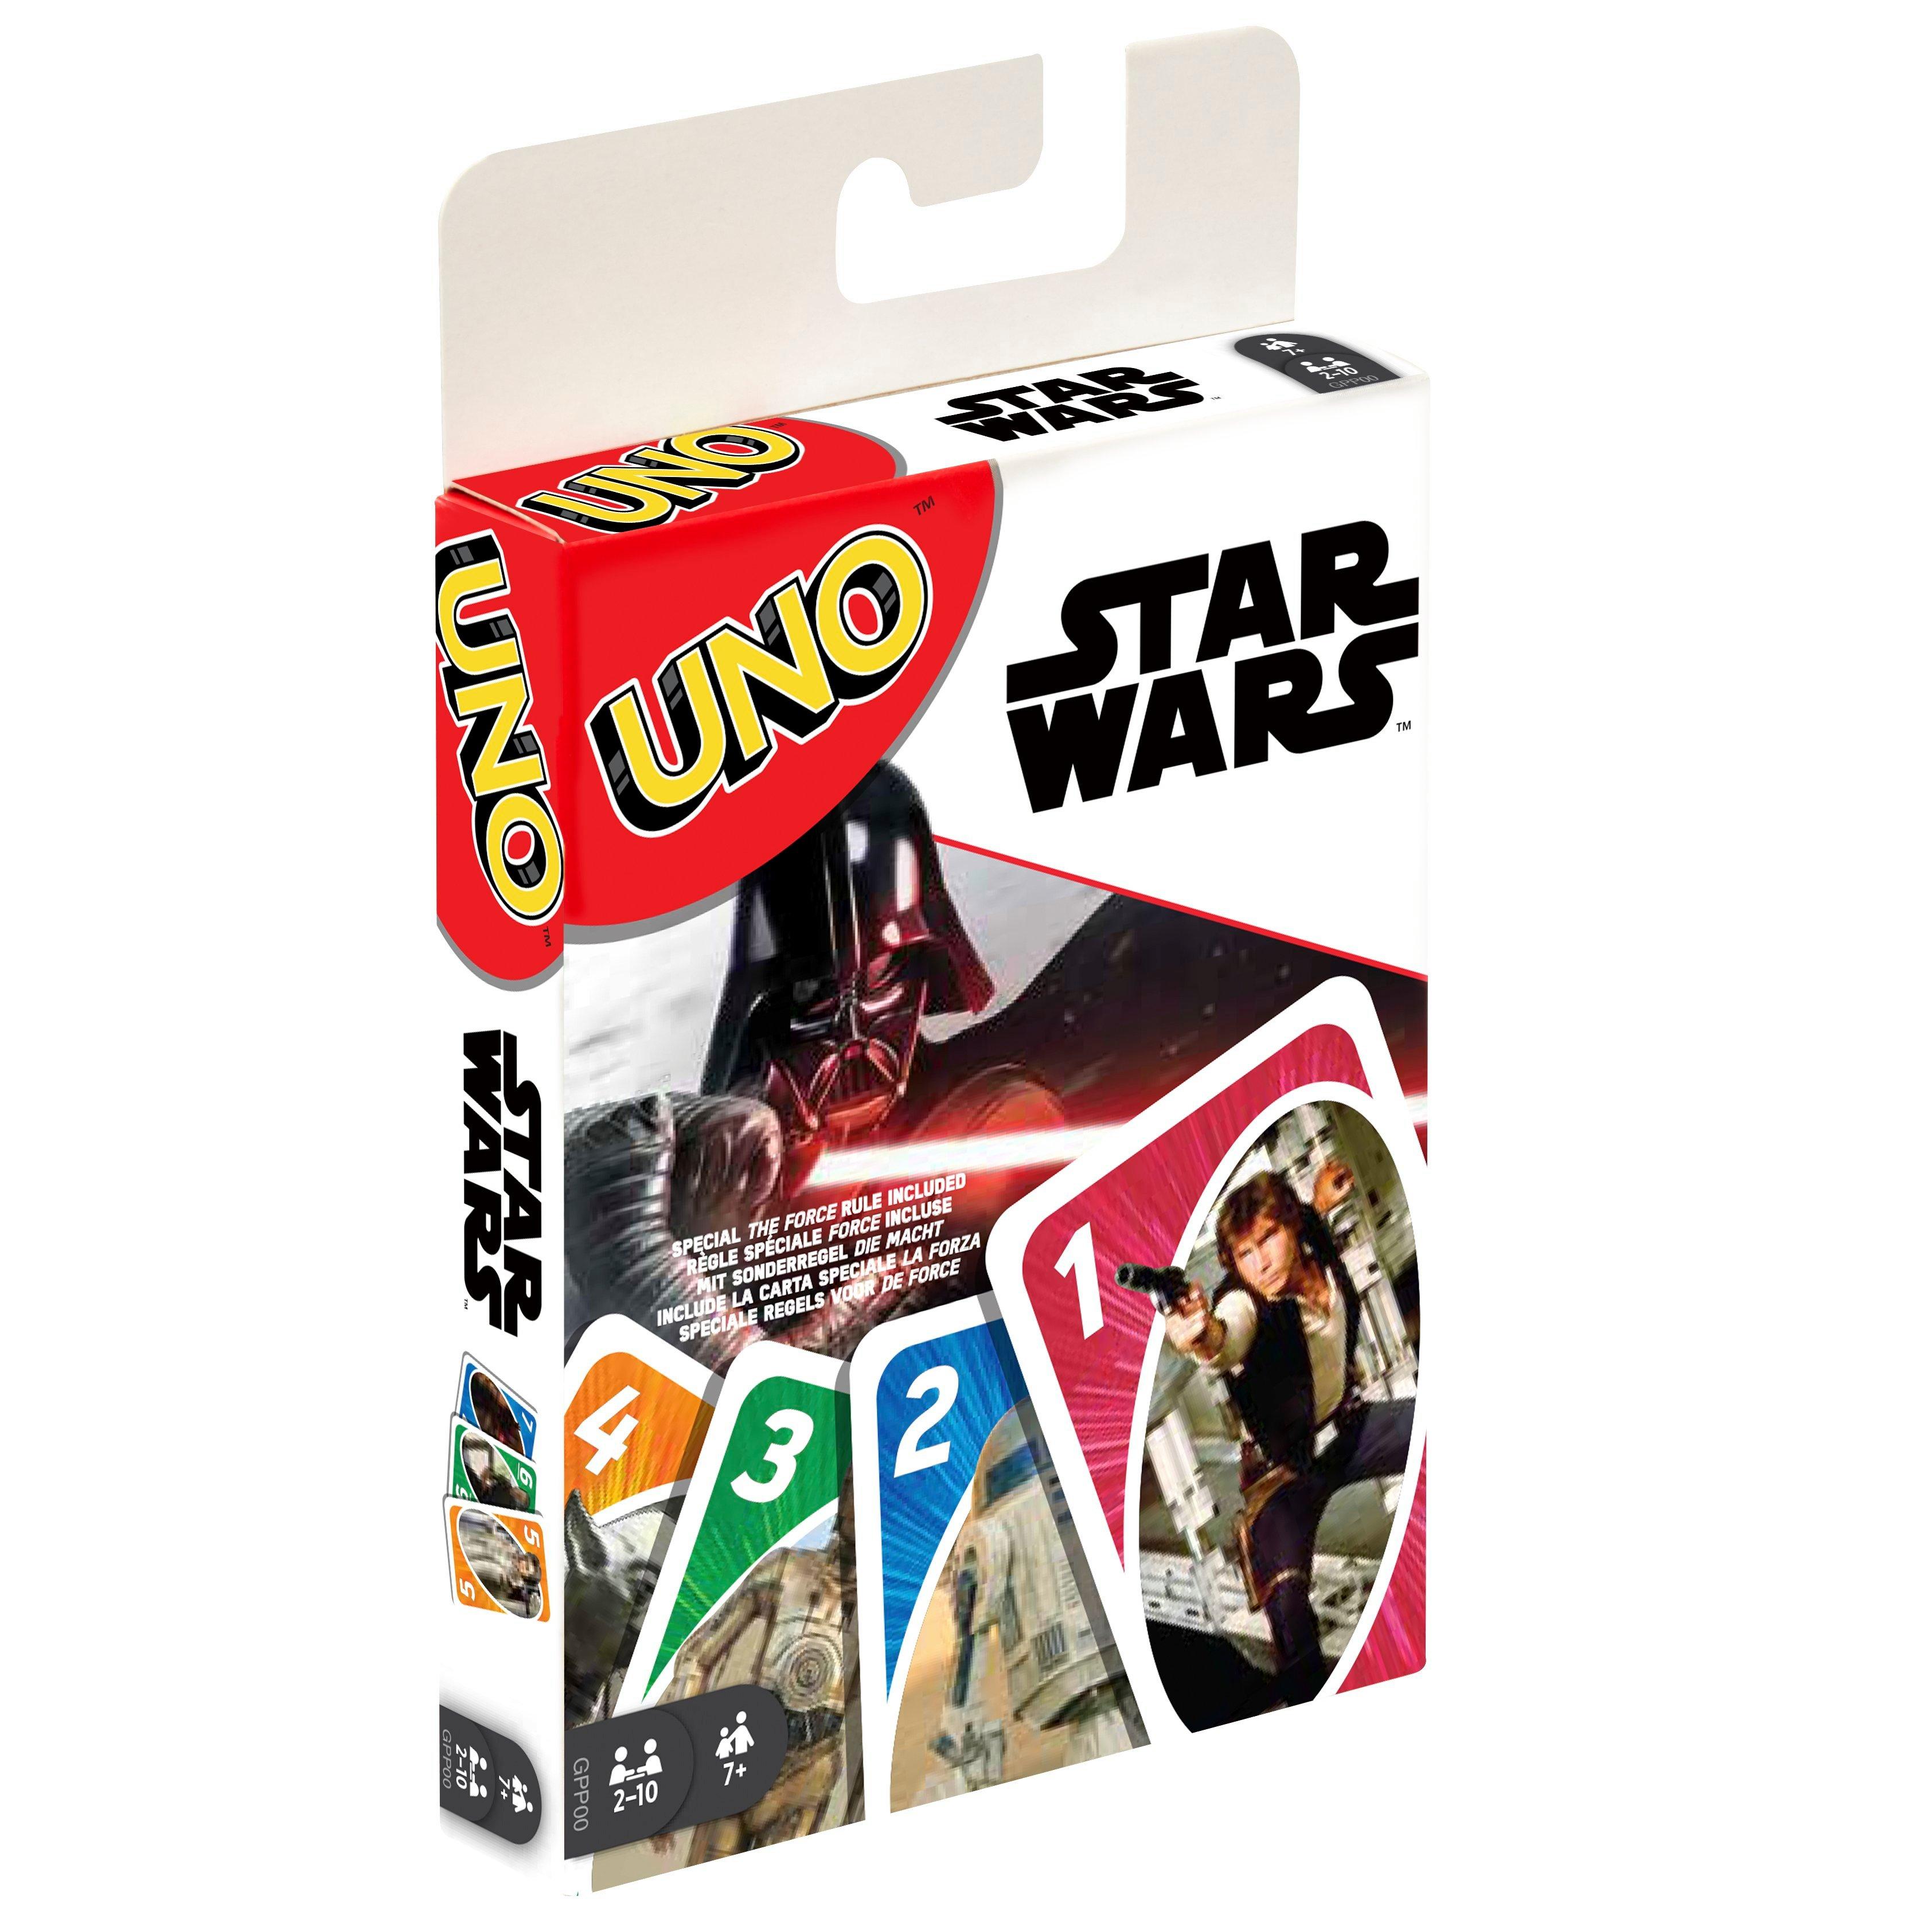 Uno is a battle for the ages against your family.